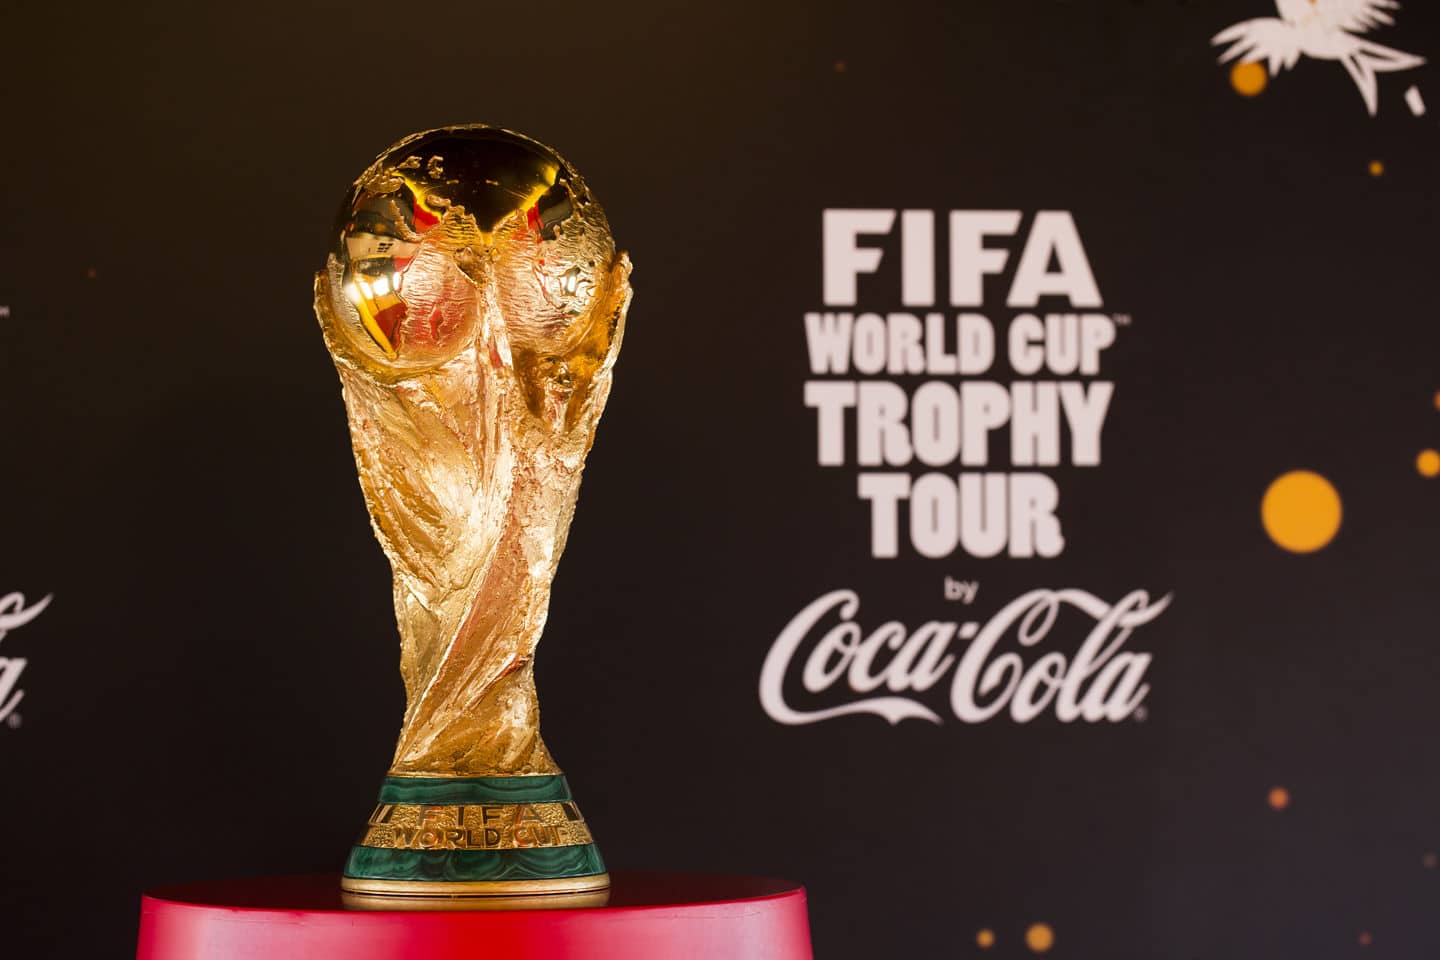 Fifa world cup trophy tour by coca cola 